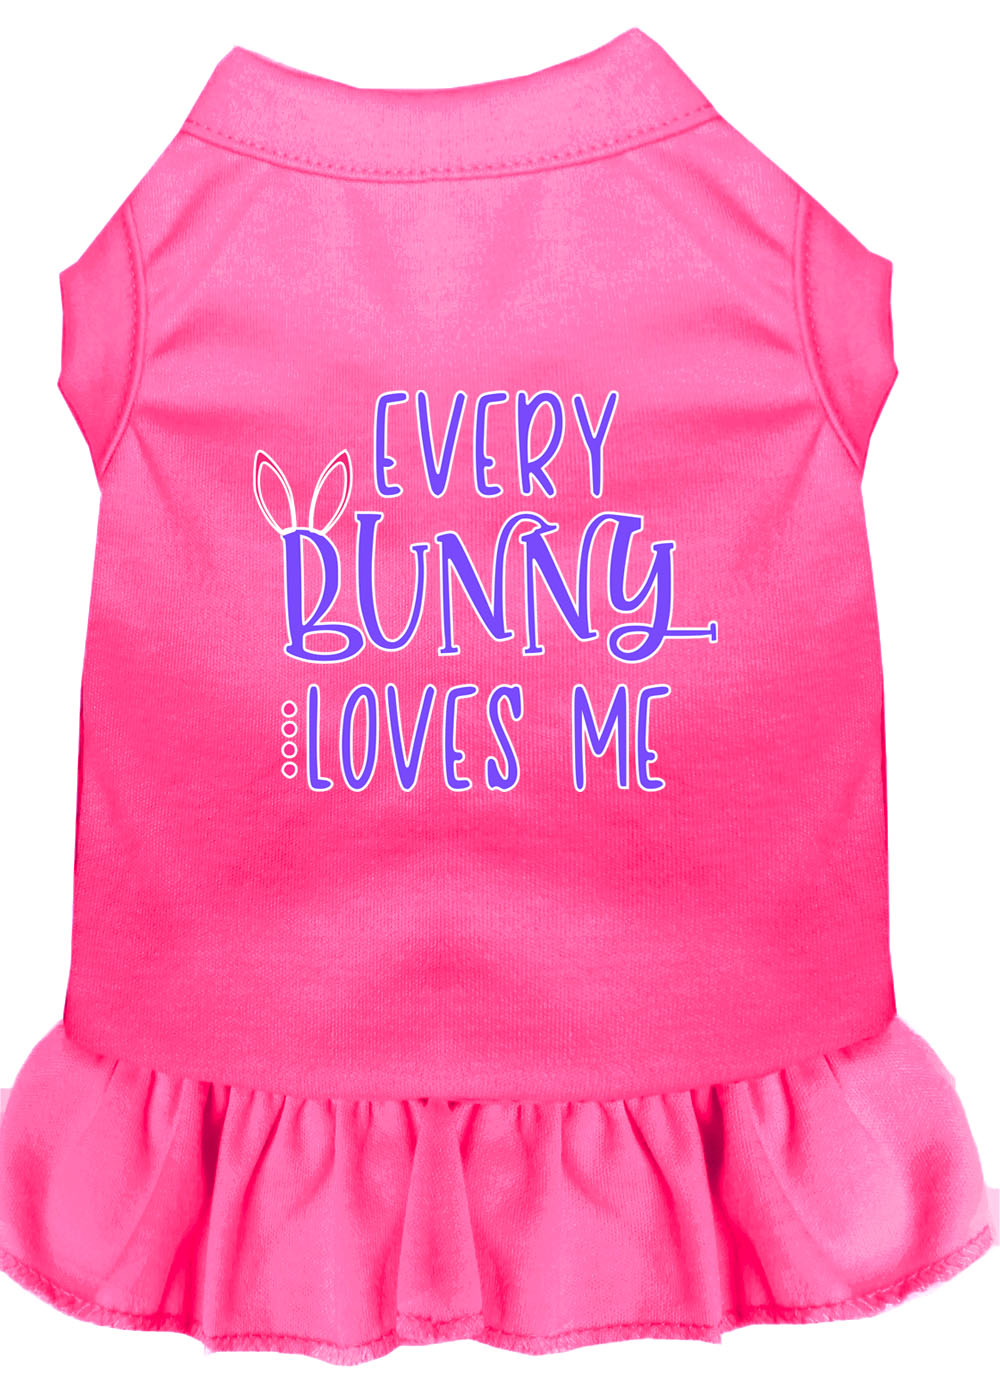 Every Bunny Loves me Screen Print Dog Dress Bright Pink 4X (22)